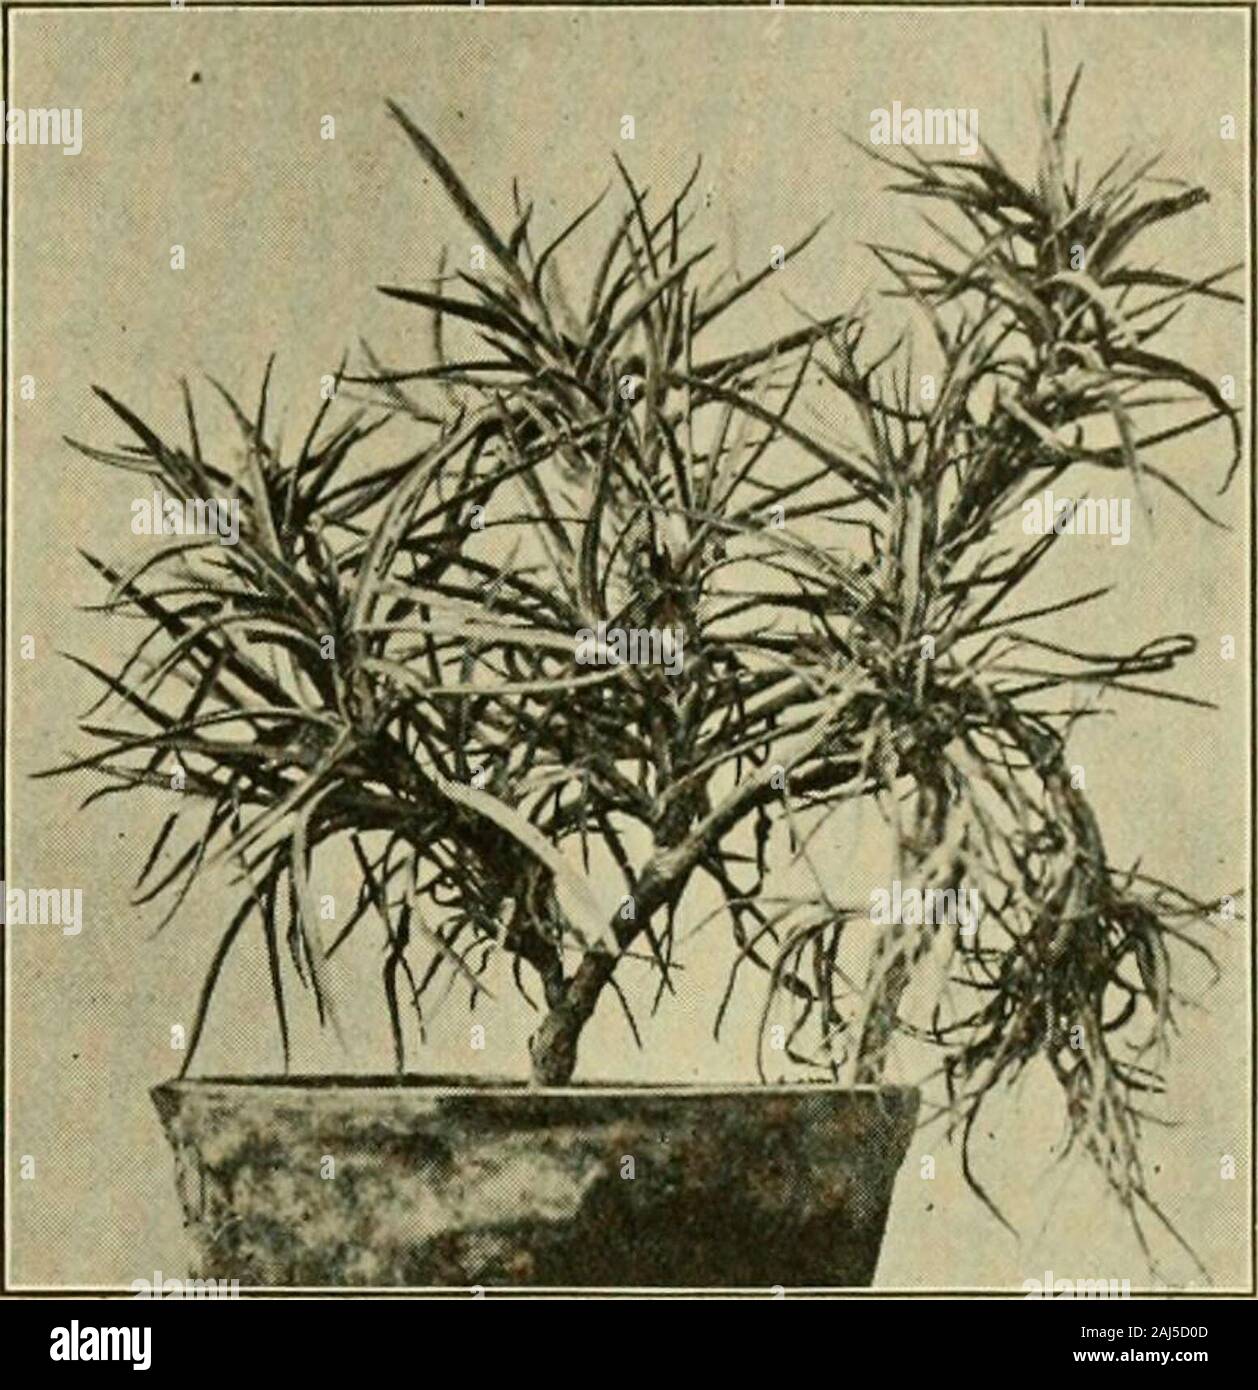 Fungous diseases of plants . Fig. 152. China Aster affected byFusarium FUNGI IMPERFECTI 321 study of the disease does notappear to have been reported.The carnation stem wilt/-^or rosette, is occasionallyimportant both in thegreenhouse and garden. Asin the case of the cottonwilt and other similar dis-eases, the fungus seems togain entrance through theroot system, and its pathof attack is mainly thetracheal tissues. Steriliza-tion of the soil seems tobe the only effective meansof prevention.. Fig. 153. FusARiuM on Carnation RosKTTE Effect (Photograph by Geo. F. Atkinson) XXV. ROOT ROT OF THE VIN Stock Photo